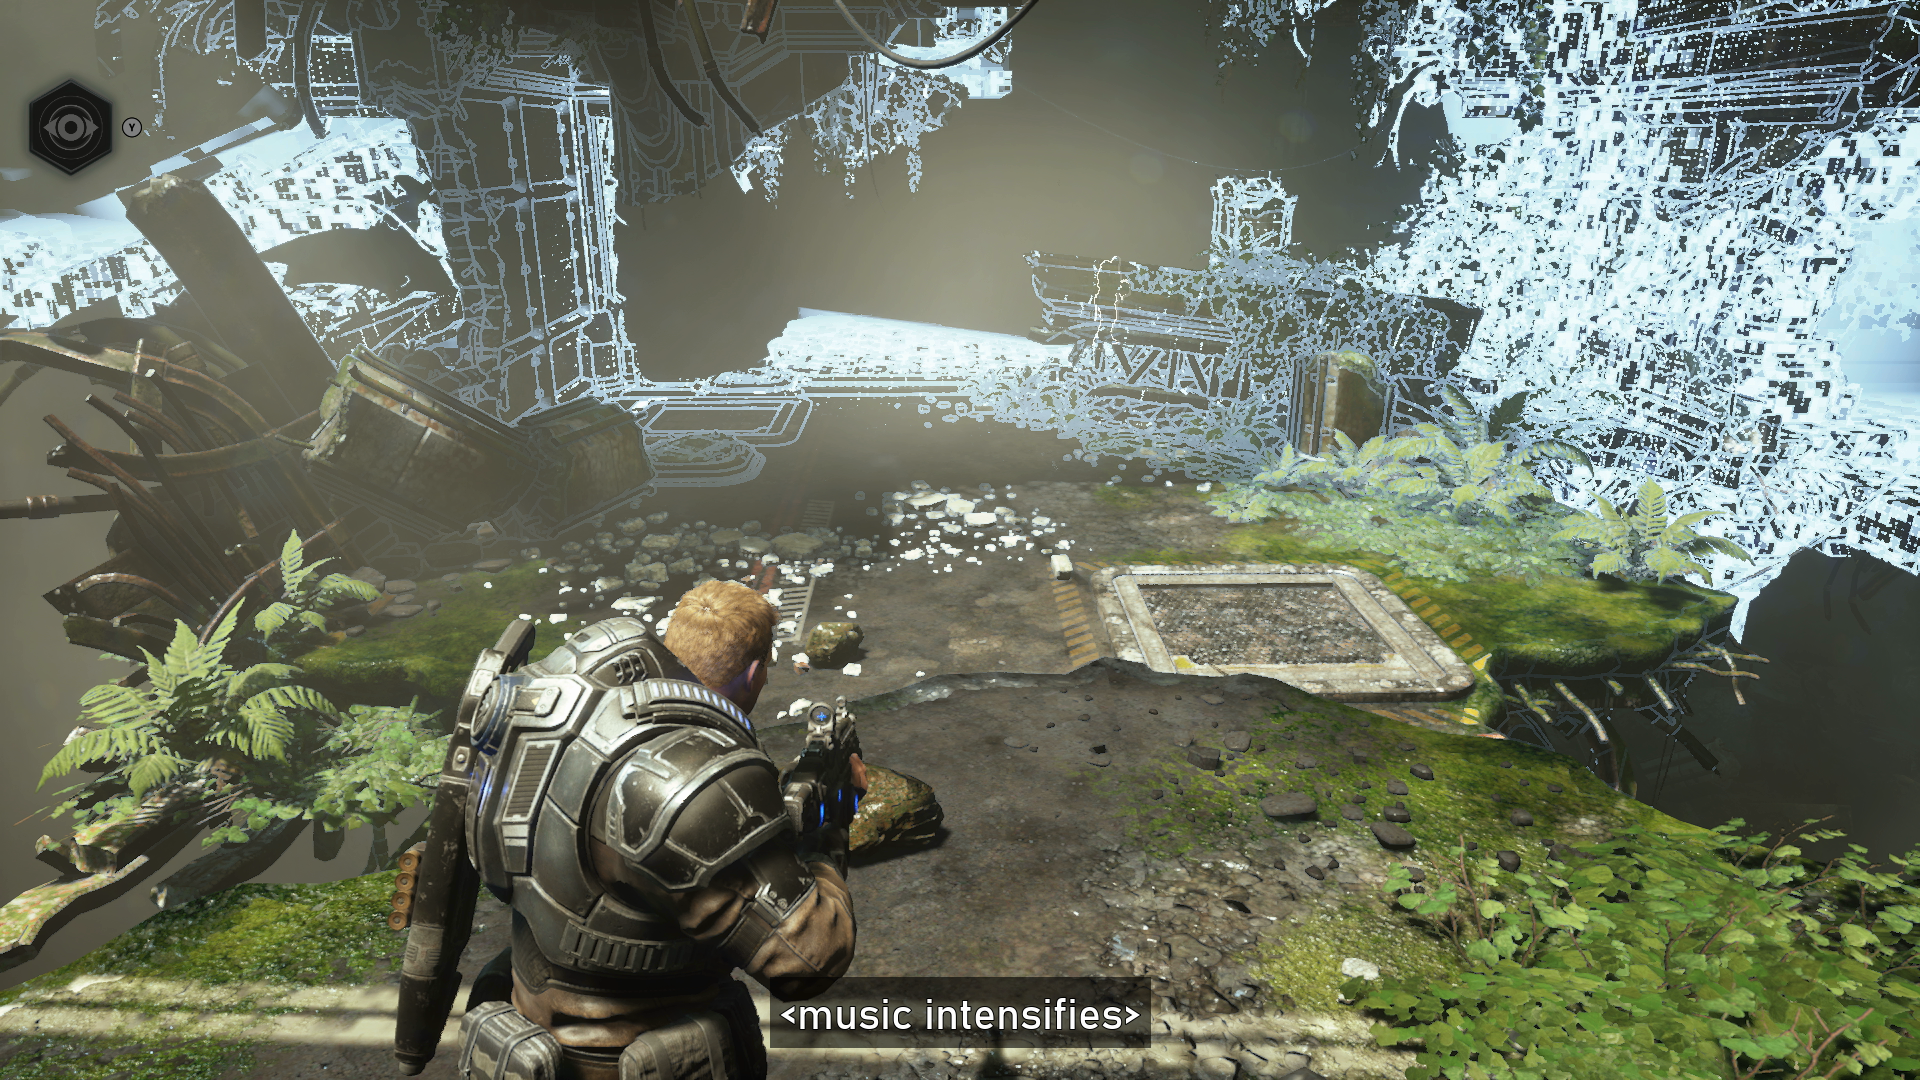 Gears 5 gameplay. The player is in the woods and their surroundings are beginning to disappear. There's a subtitle at the bottom of the screen that says, "". 